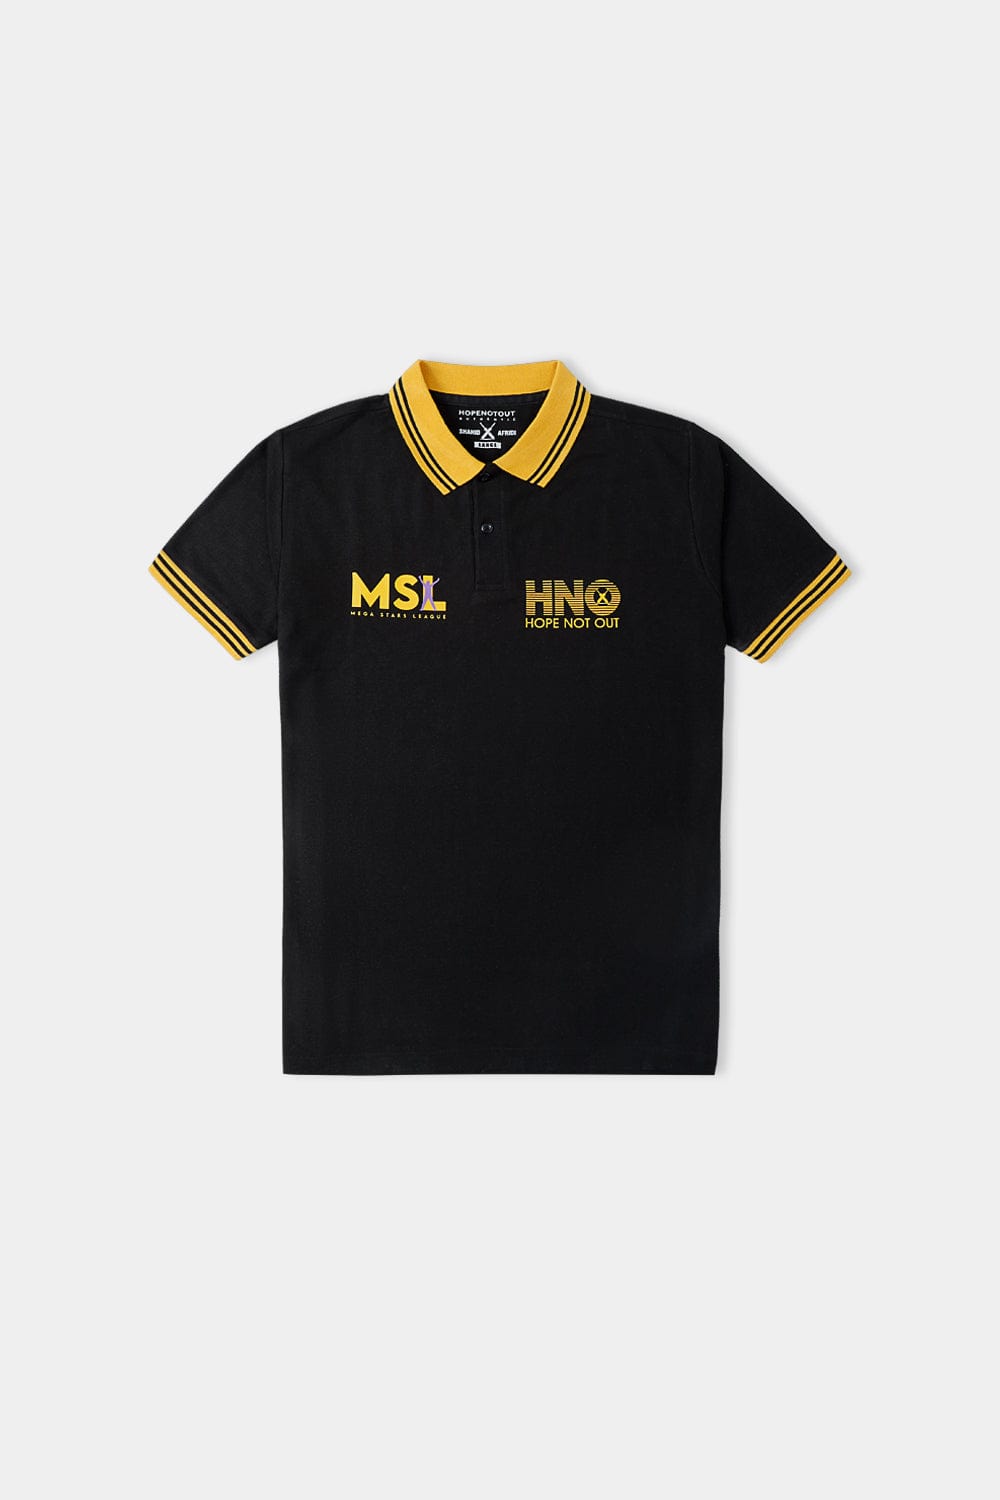 Hope Not Out by Shahid Afridi Men Polo Shirt Black Polo Shirt with Contrast Collar and MSL Cricket League Logo by Hope Not Out